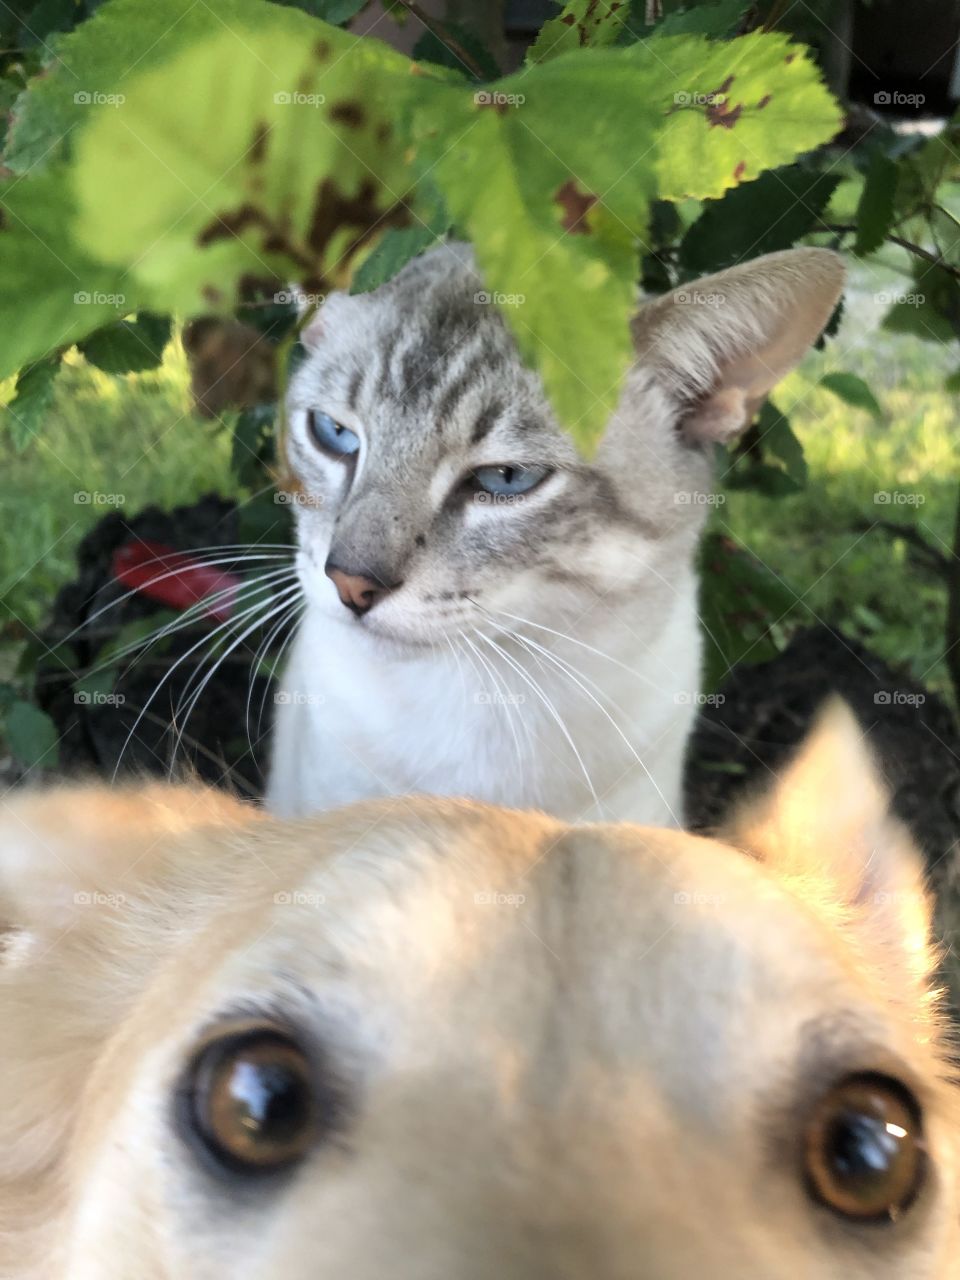 Unedited me trying to do a photo shoot with my cat but my dog wanted to be a part of it and photo bombed 